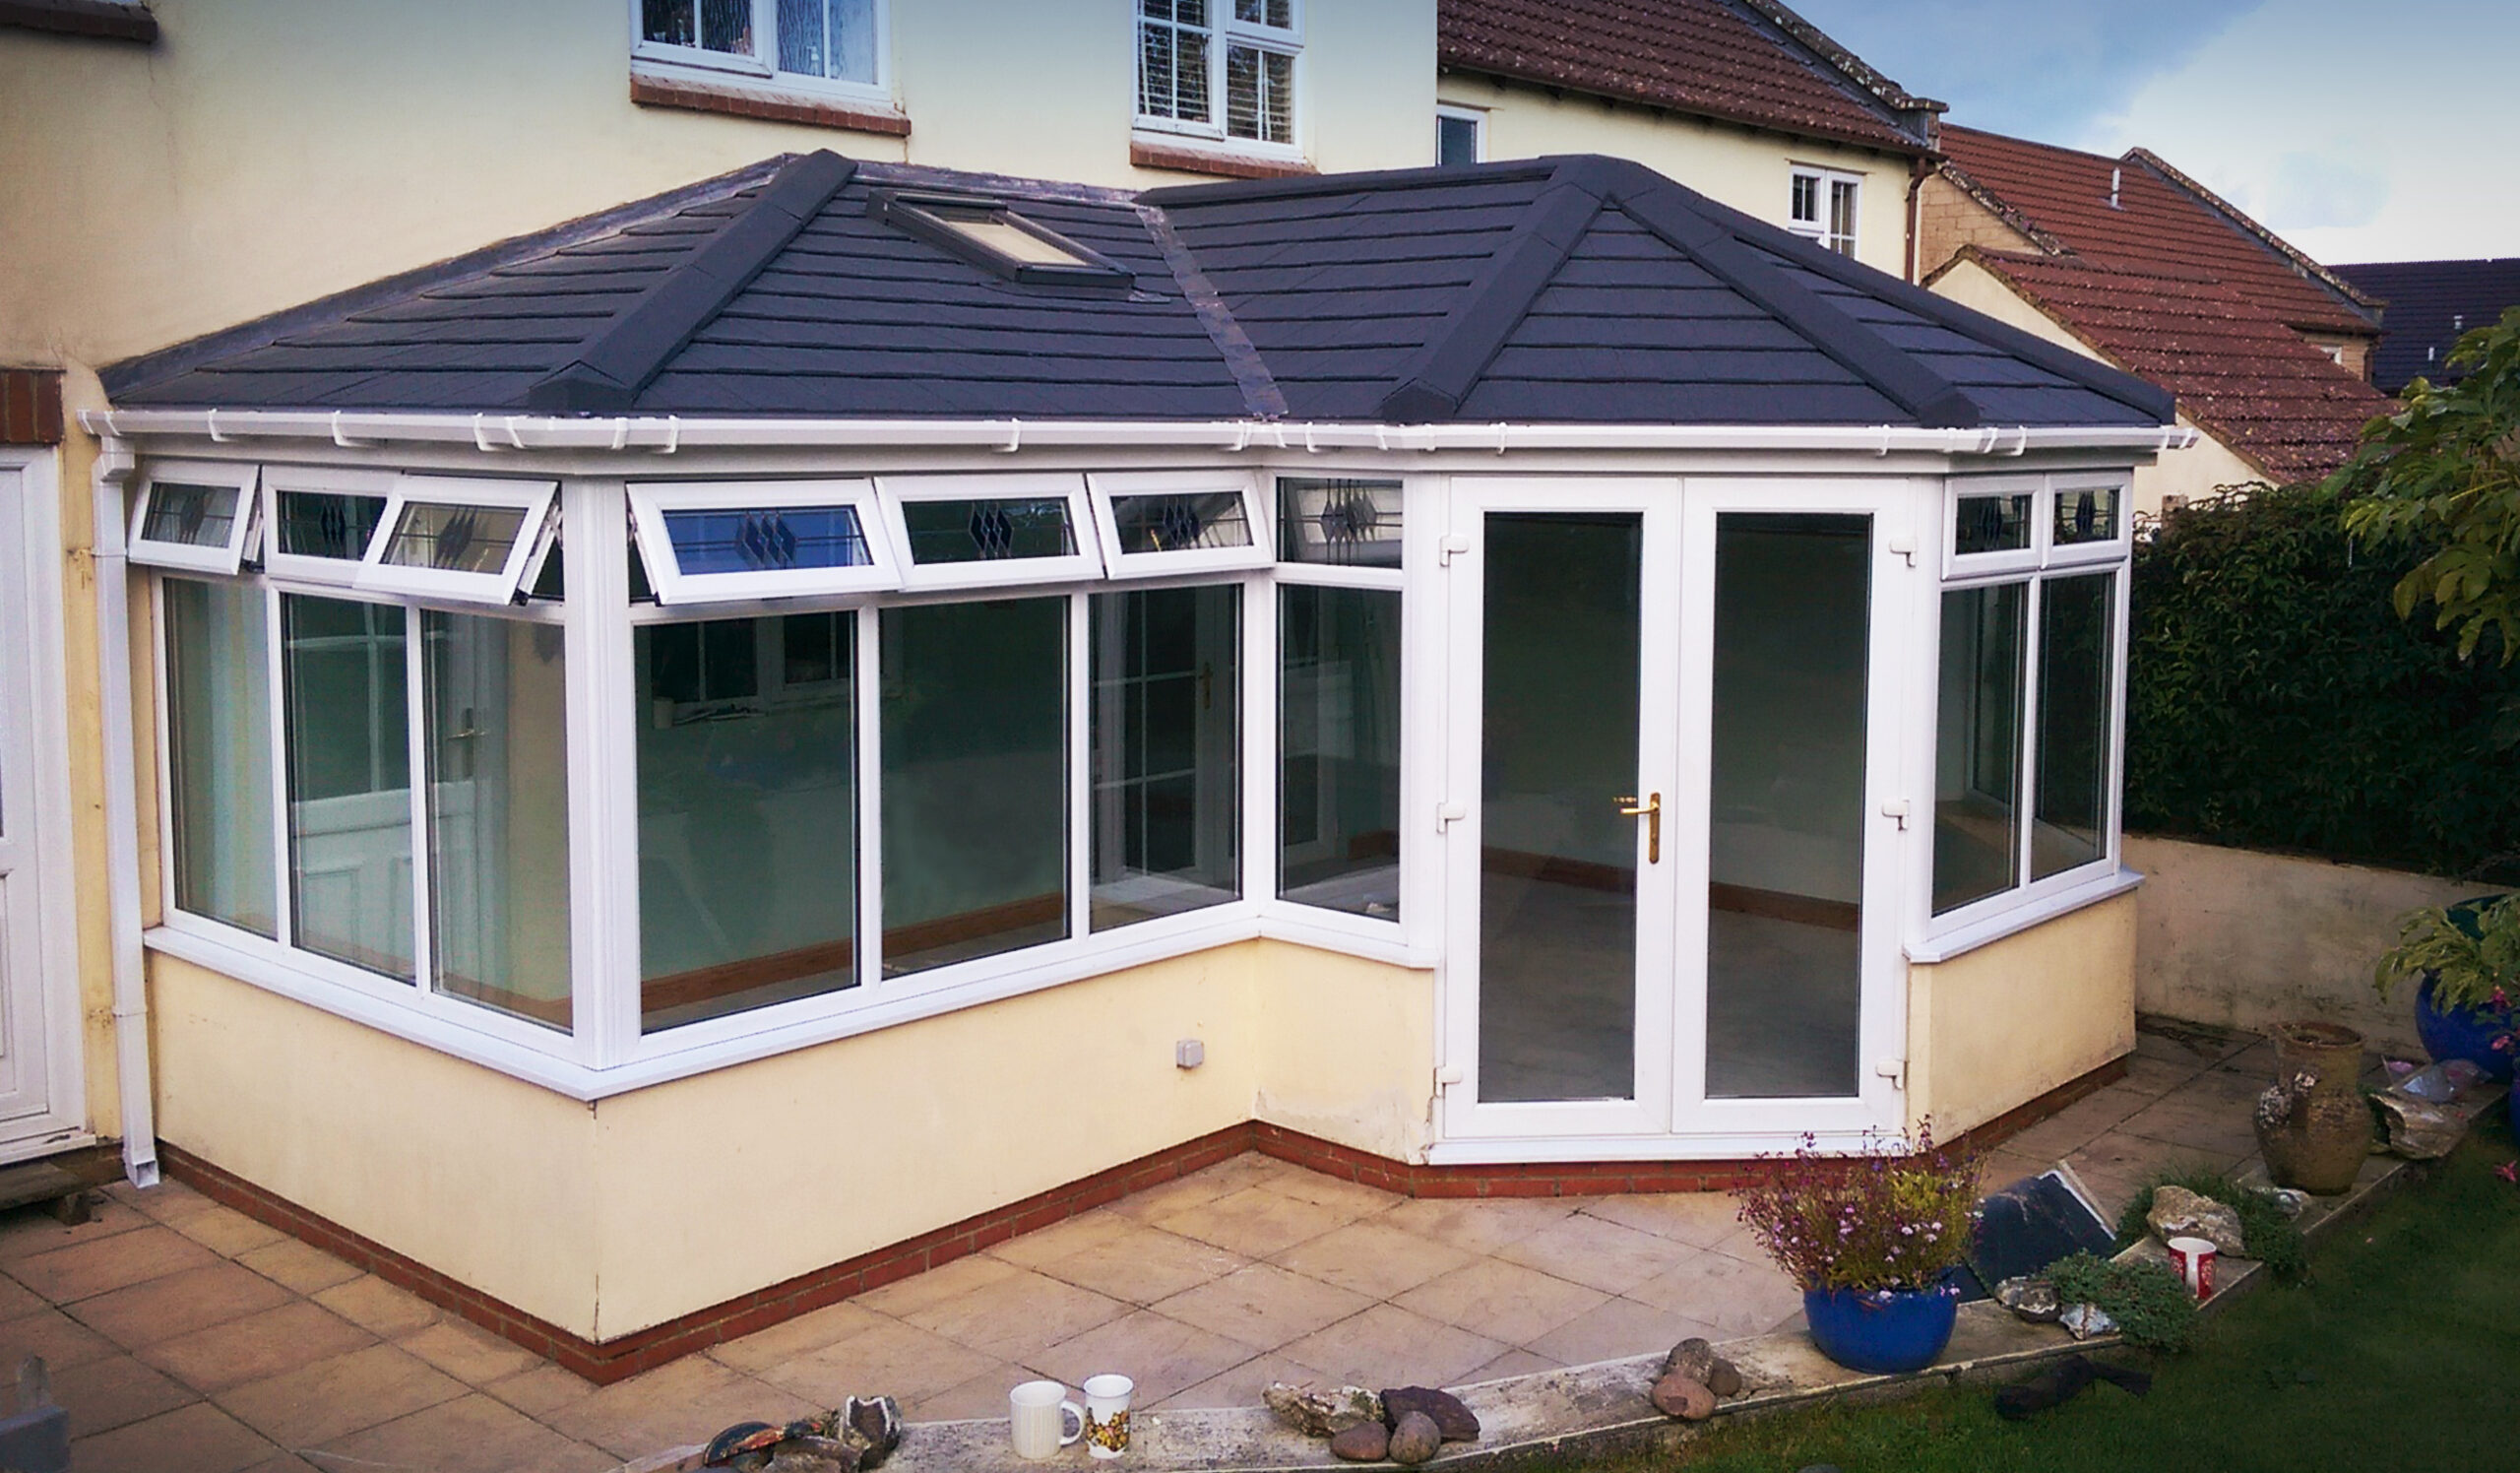 NewRoof Essex | Roofers | Leka Roofing | Tile Conservatory Roof | Tile Roof Installers